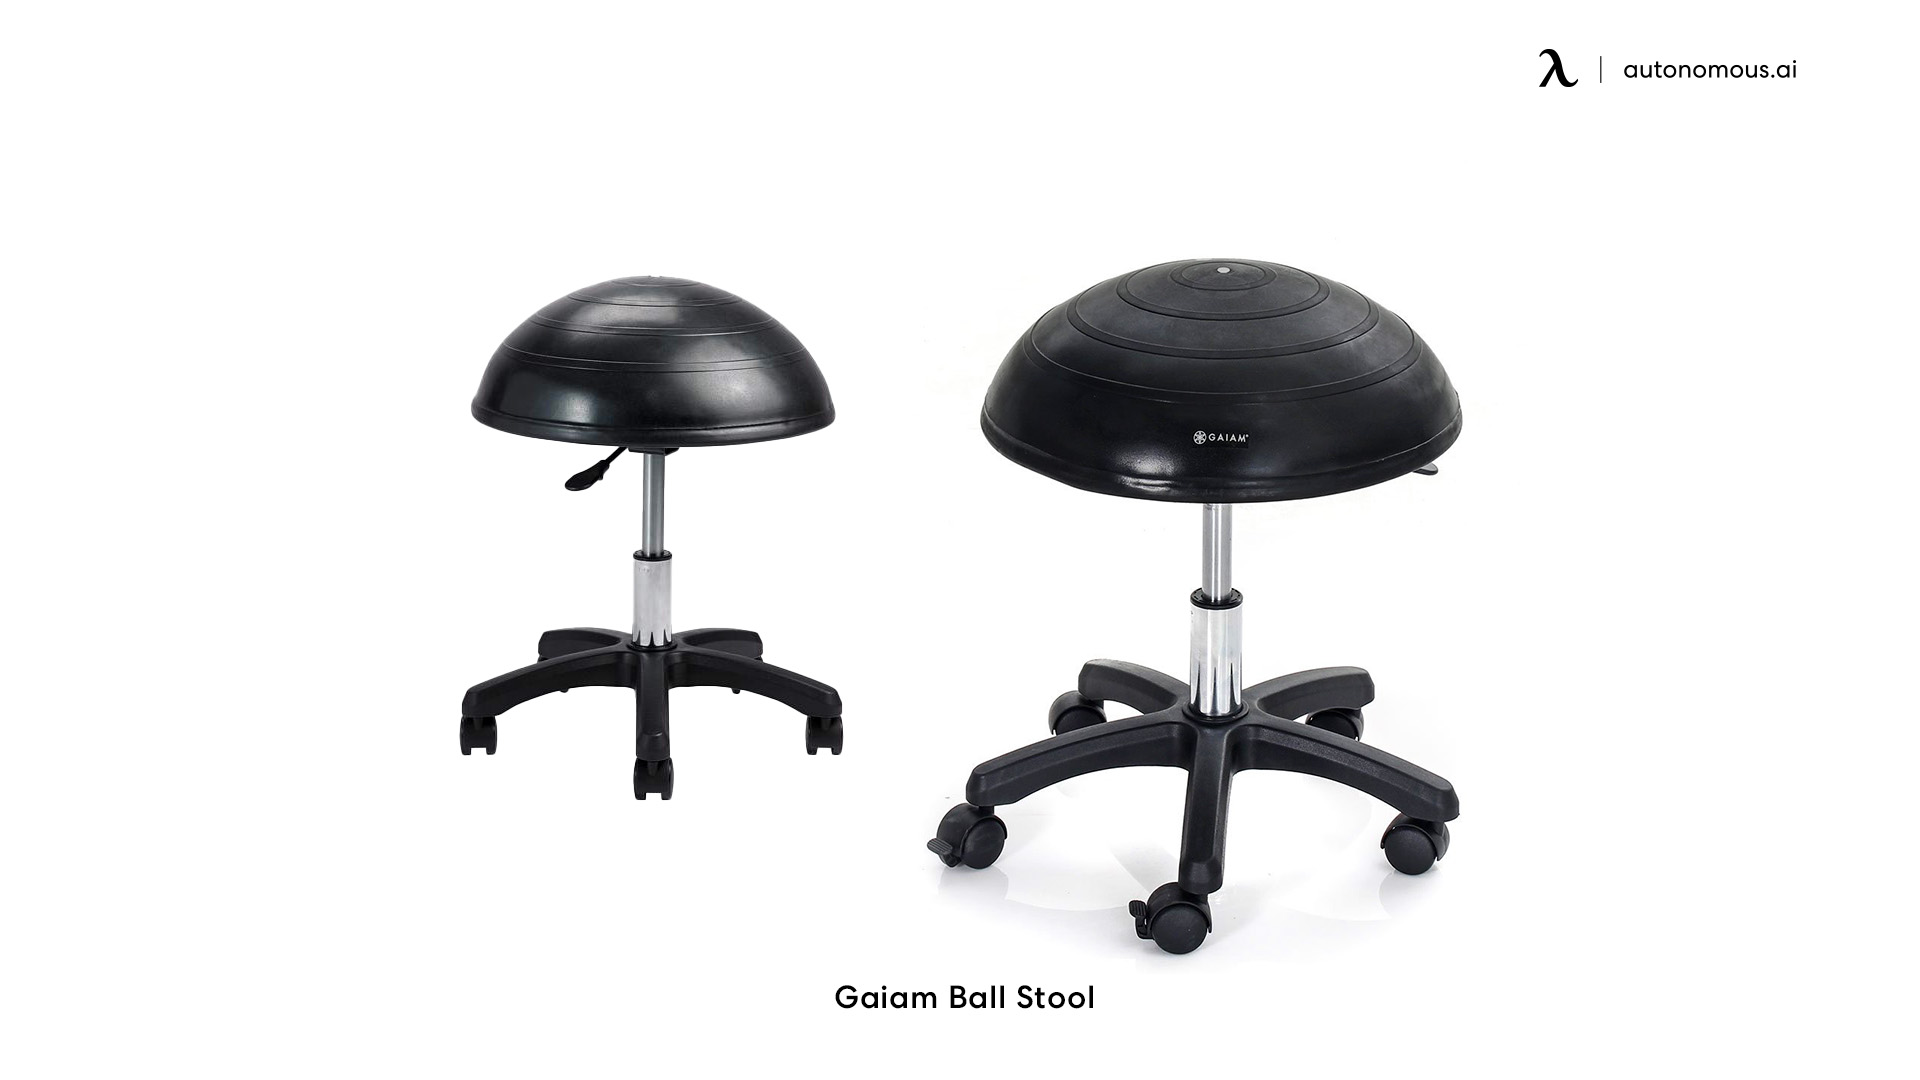 Gaiam stability ball chair for office